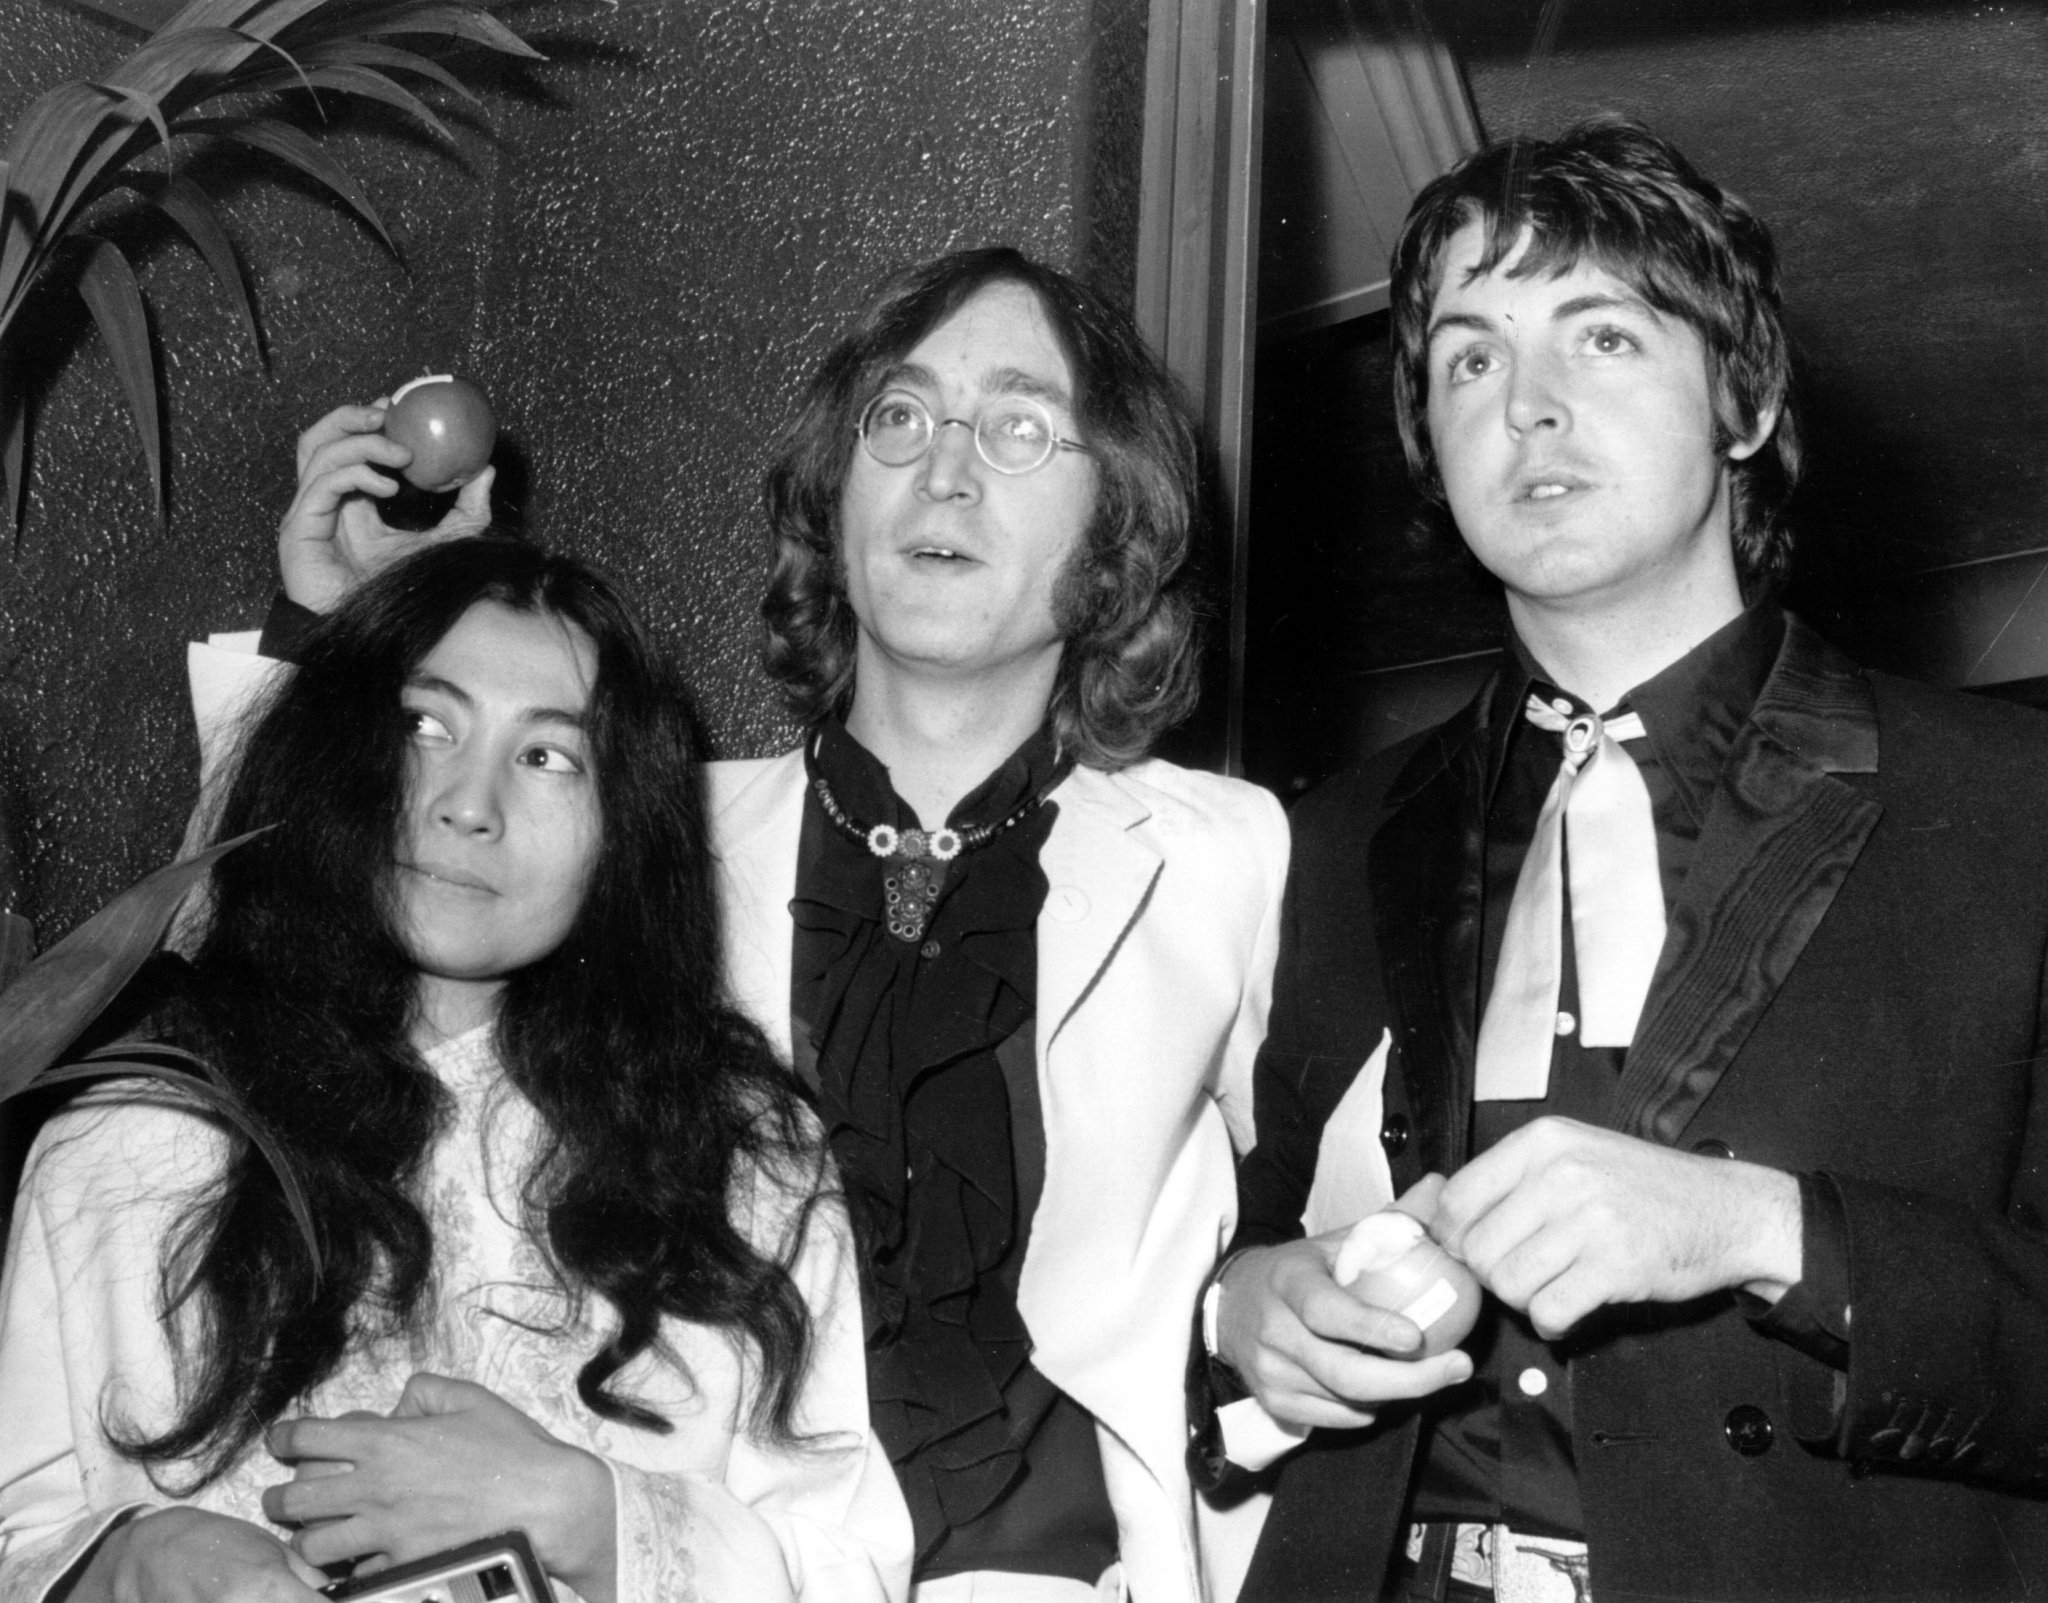 Listen to a New Demo and Studio Outtake of The Beatles' "Glass Onion" From the 50th Anniversary Edition of the White Album